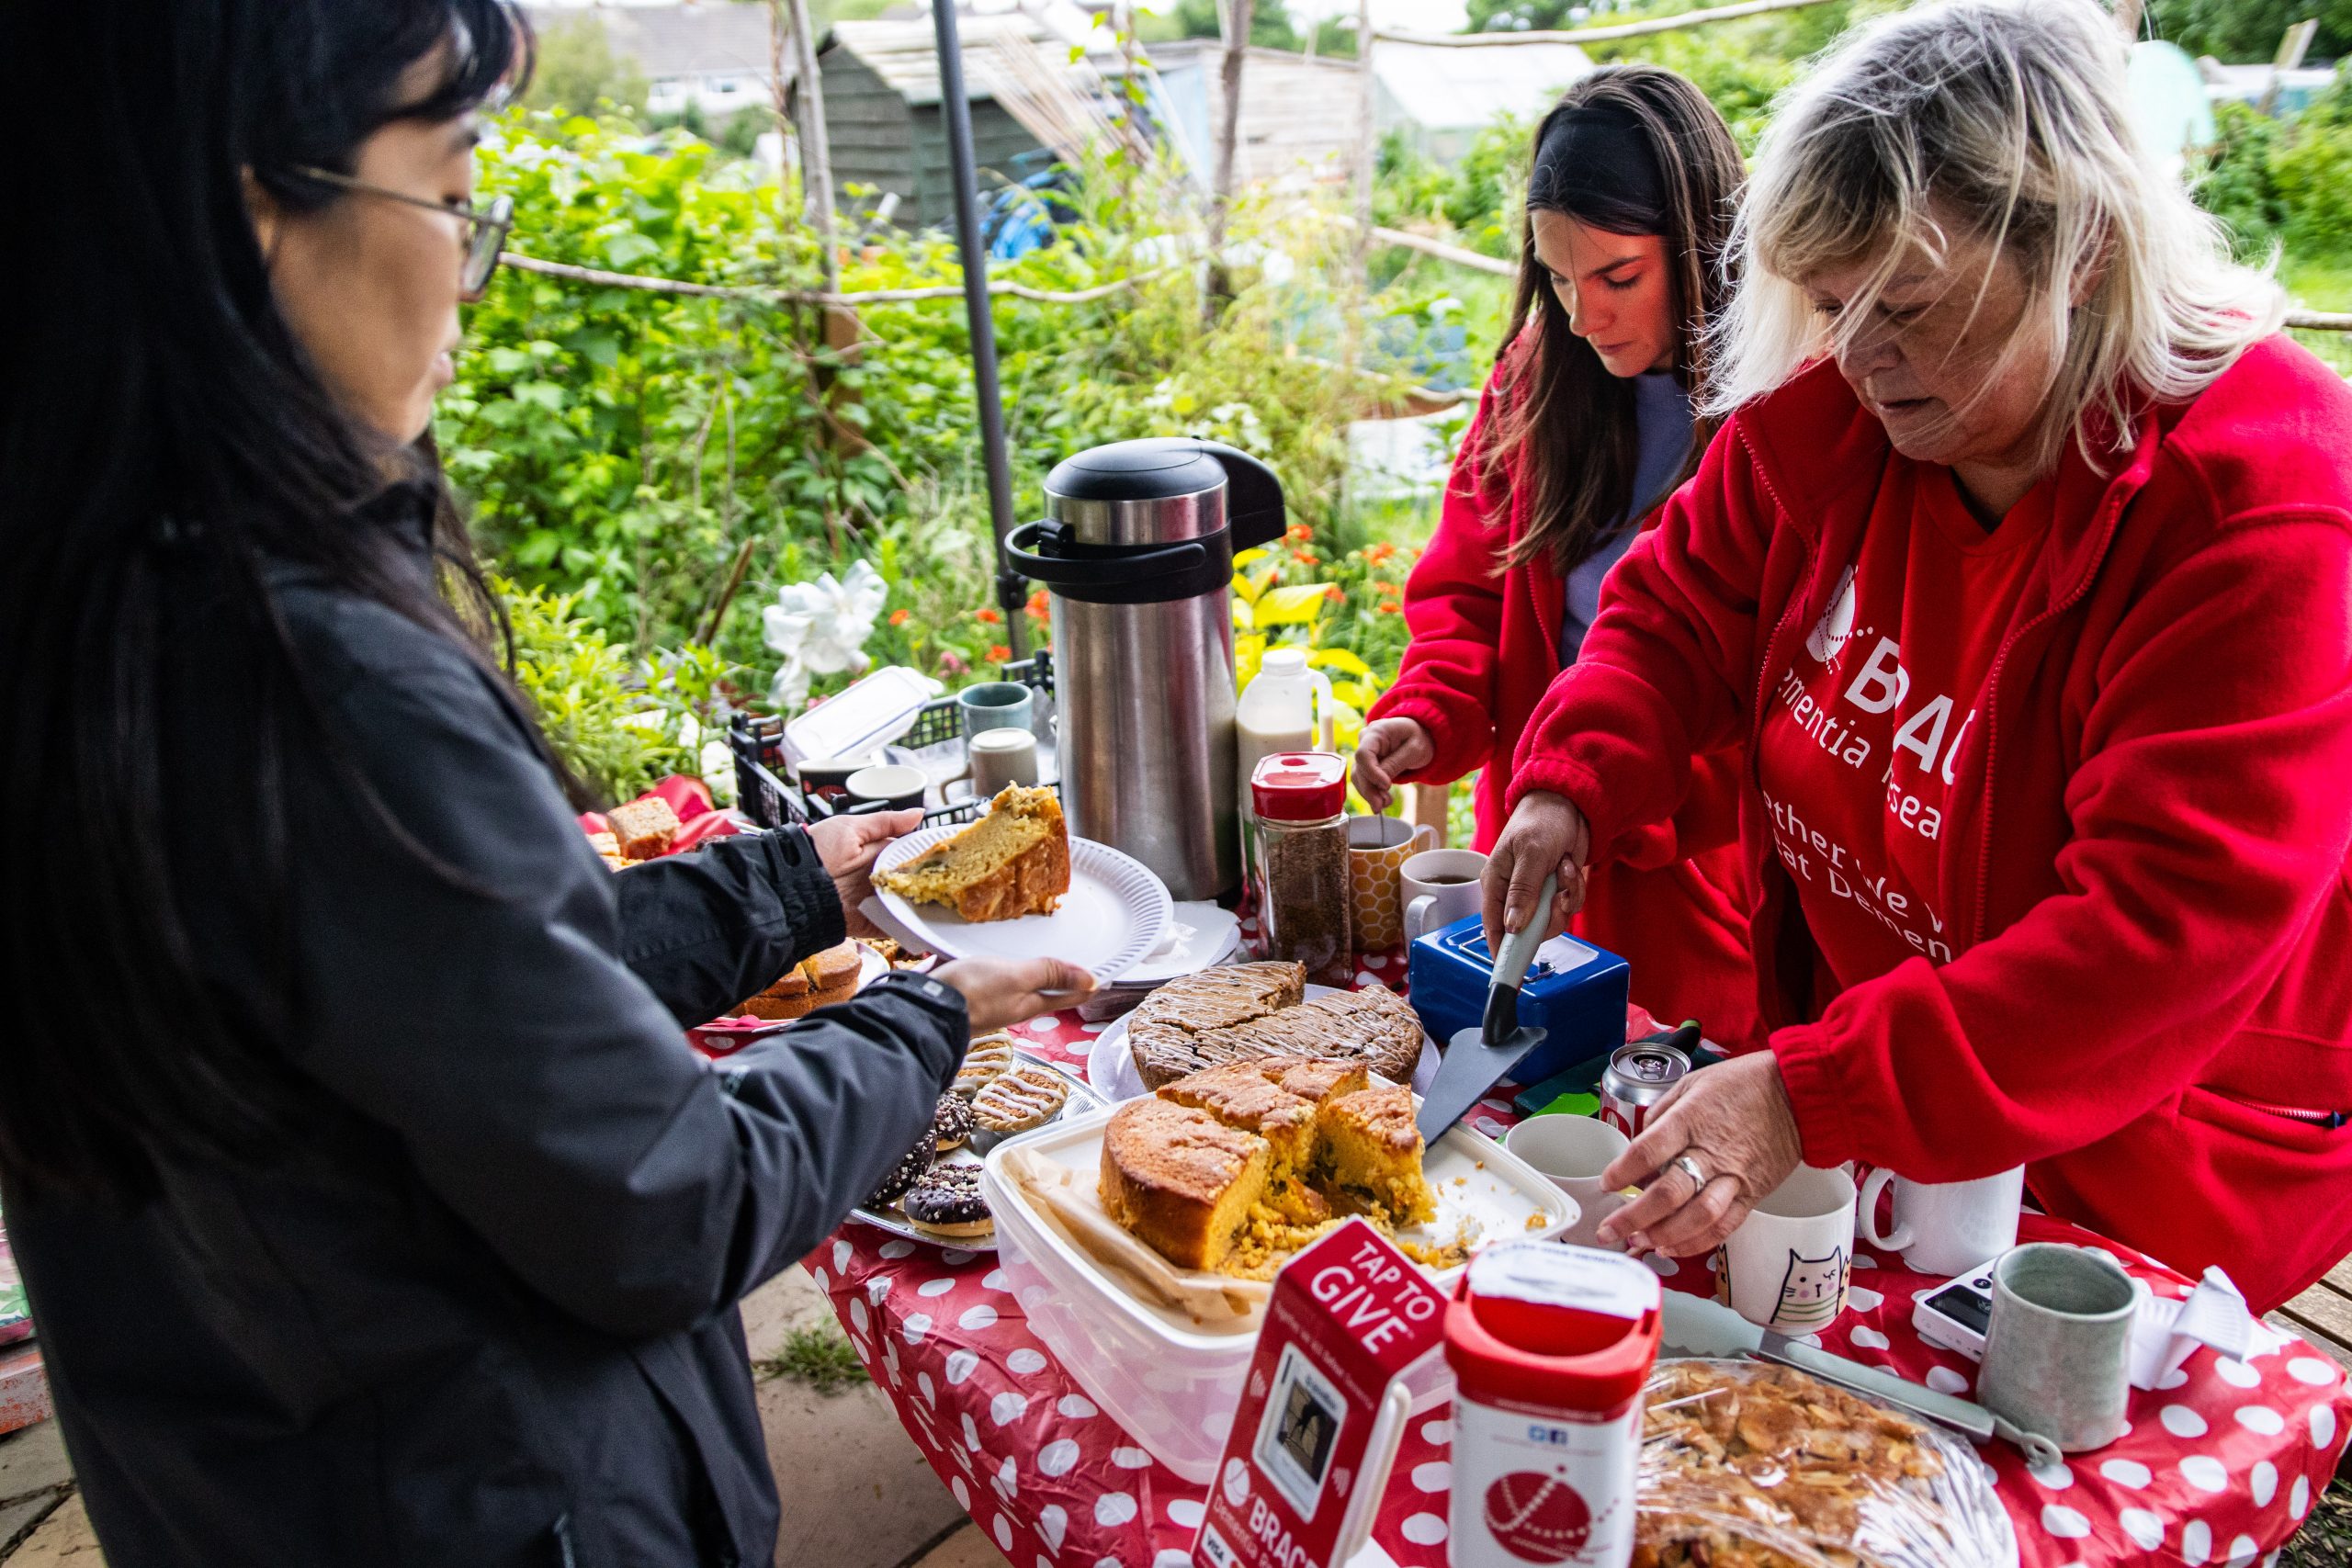 Two women in red fleeces are serving cake and hot drinks to another woman.